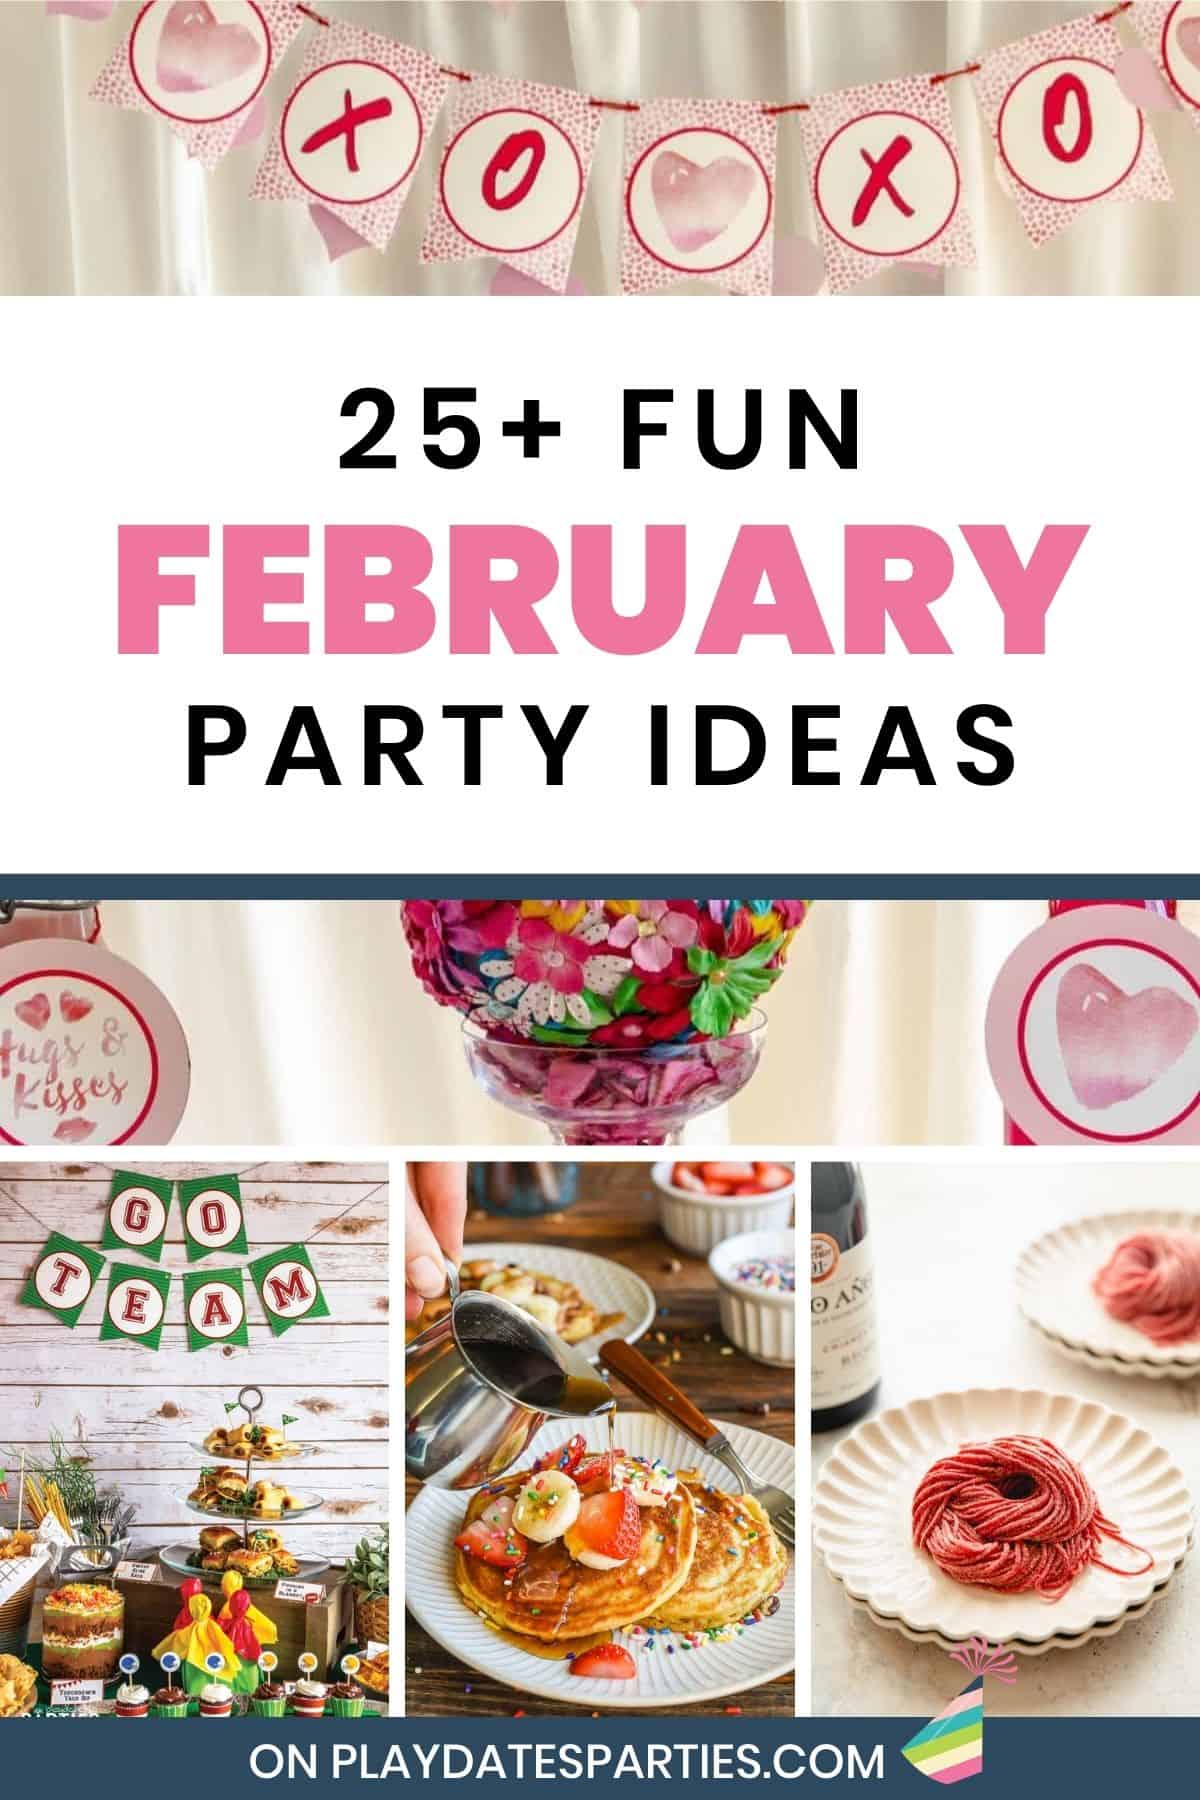 25 Must-See Birthday Party Games for Kids - Simply Full of Delight